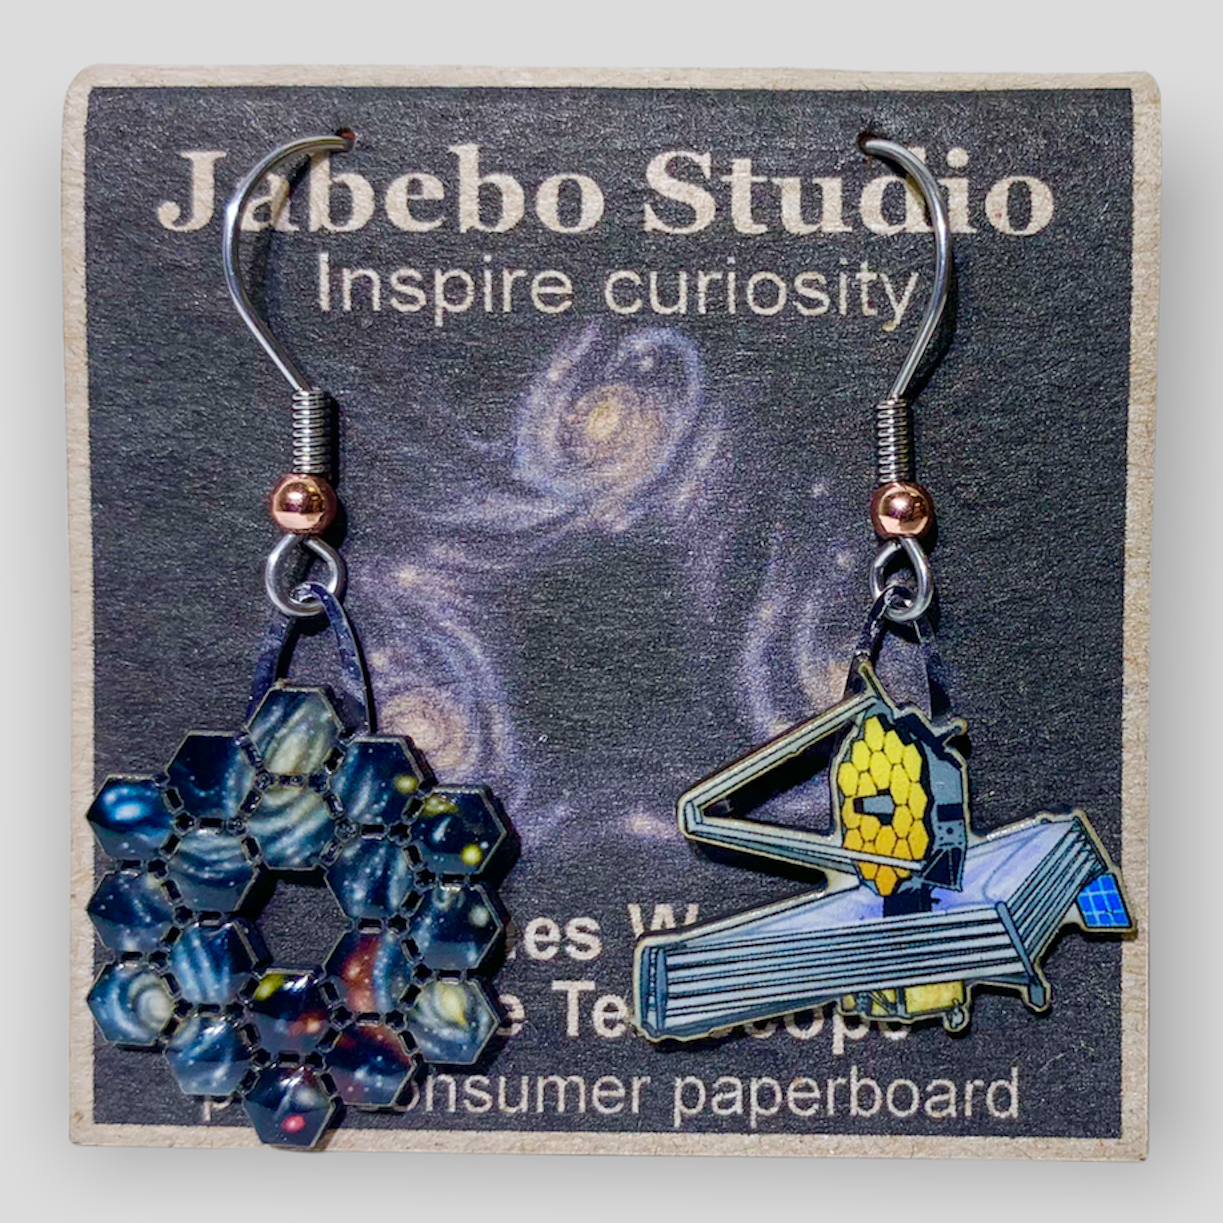 Picture shown is of 1 inch tall pair of earrings of the James Webb Space Telescope.